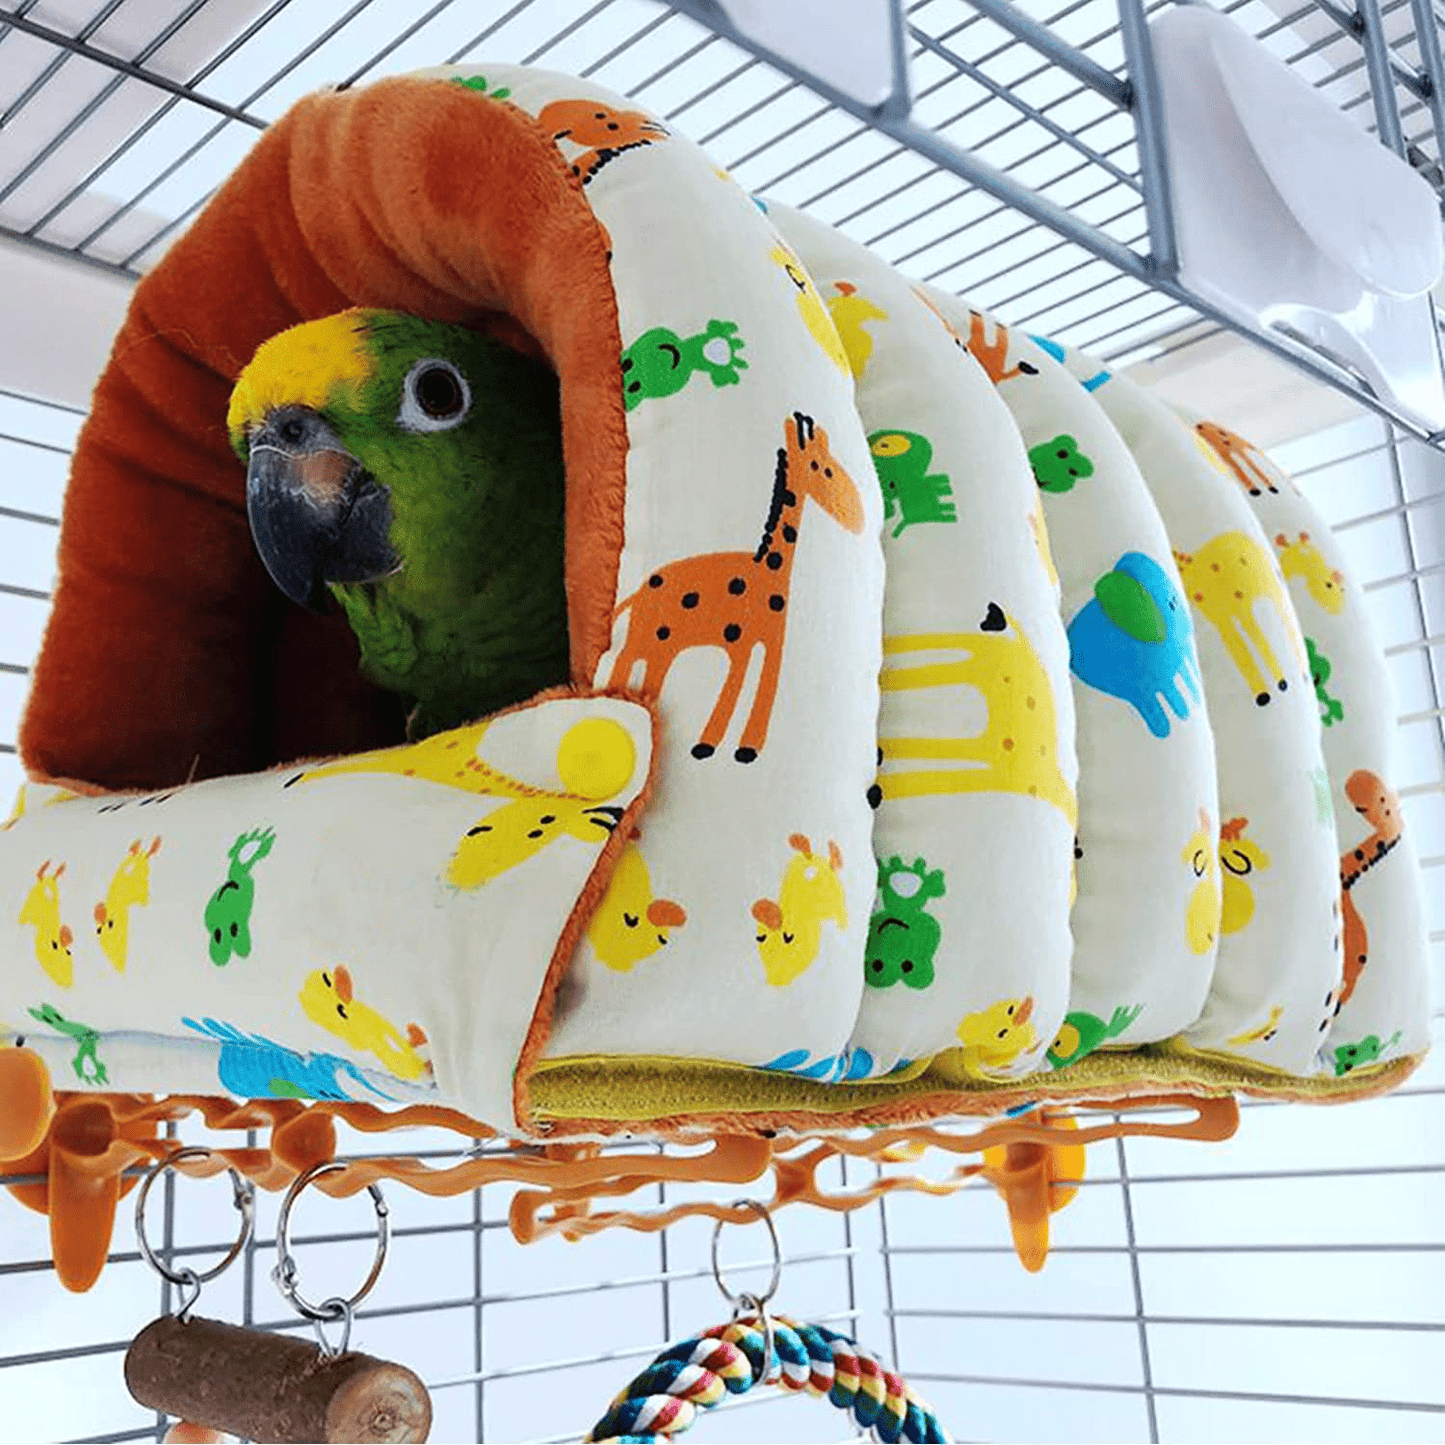 Yagamii Detachable Winter Bird Nest Box Parrot Toys Birdcages Accessories Birdhouses Sleeping Bed for Finch Parakeet Cockatiel Conure Small Animal Houses Habitat Warm Hanging Snuggle Tent Hammock Hut